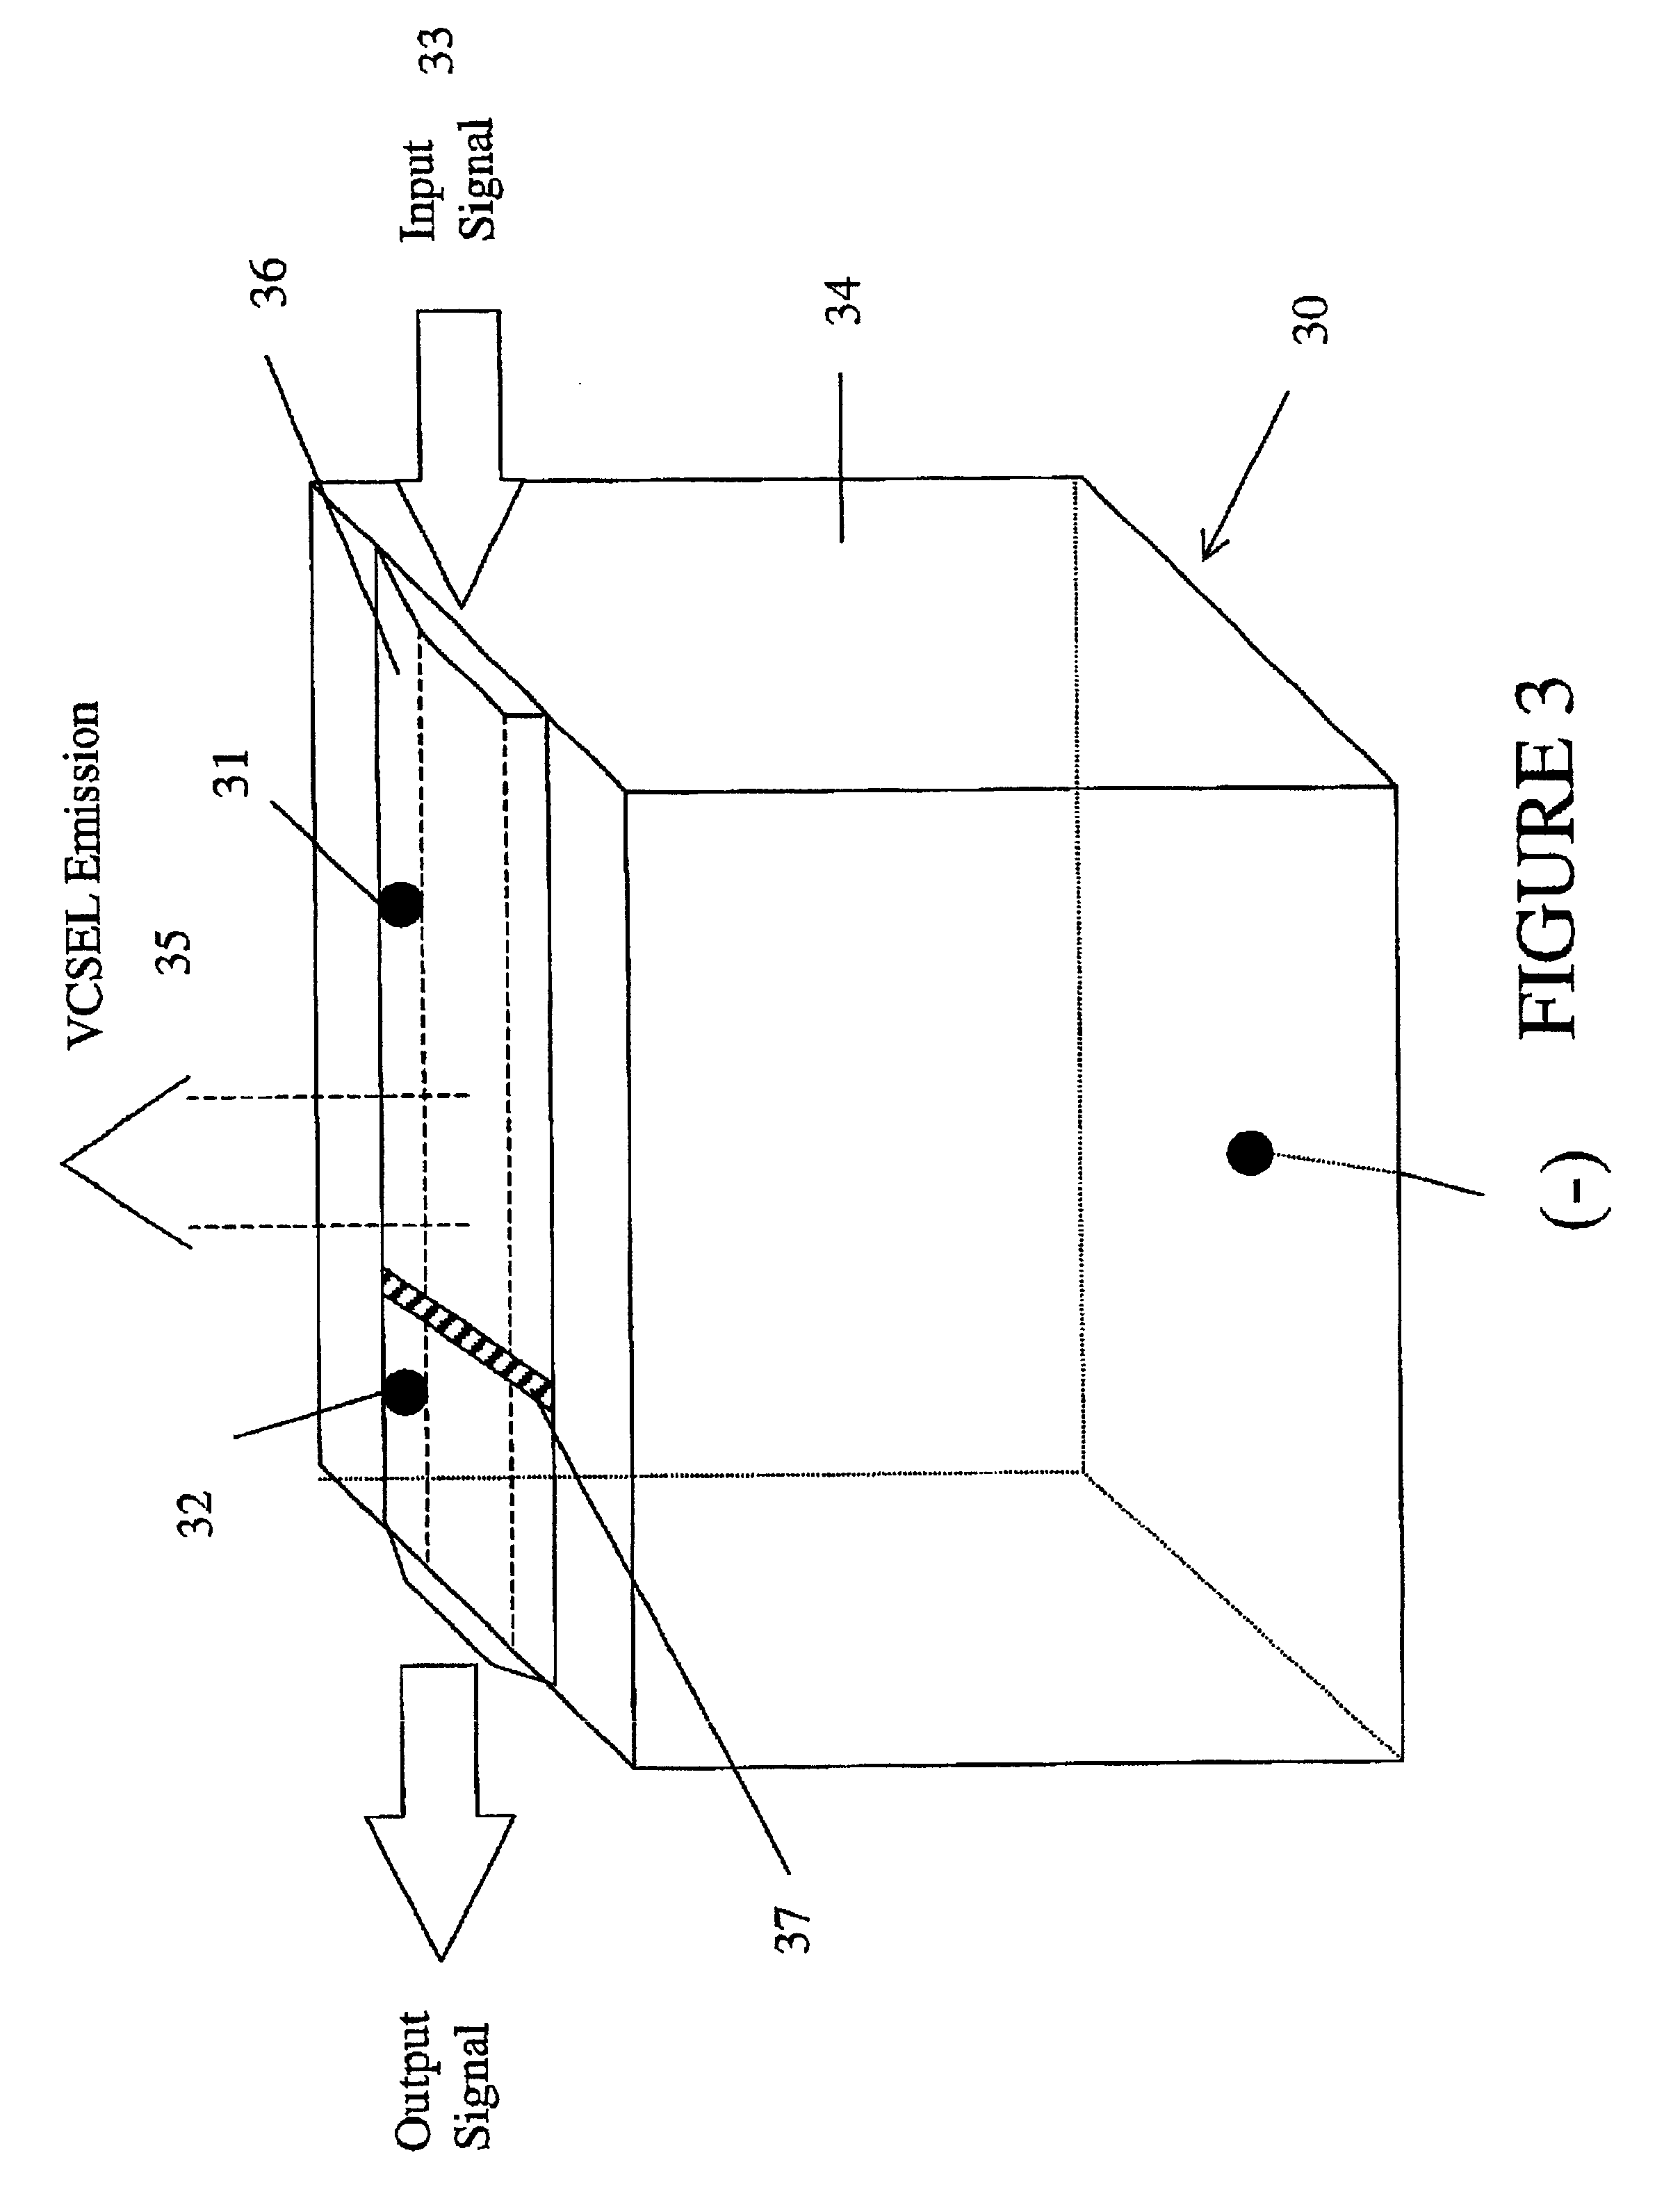 Semiconductor optical amplifier